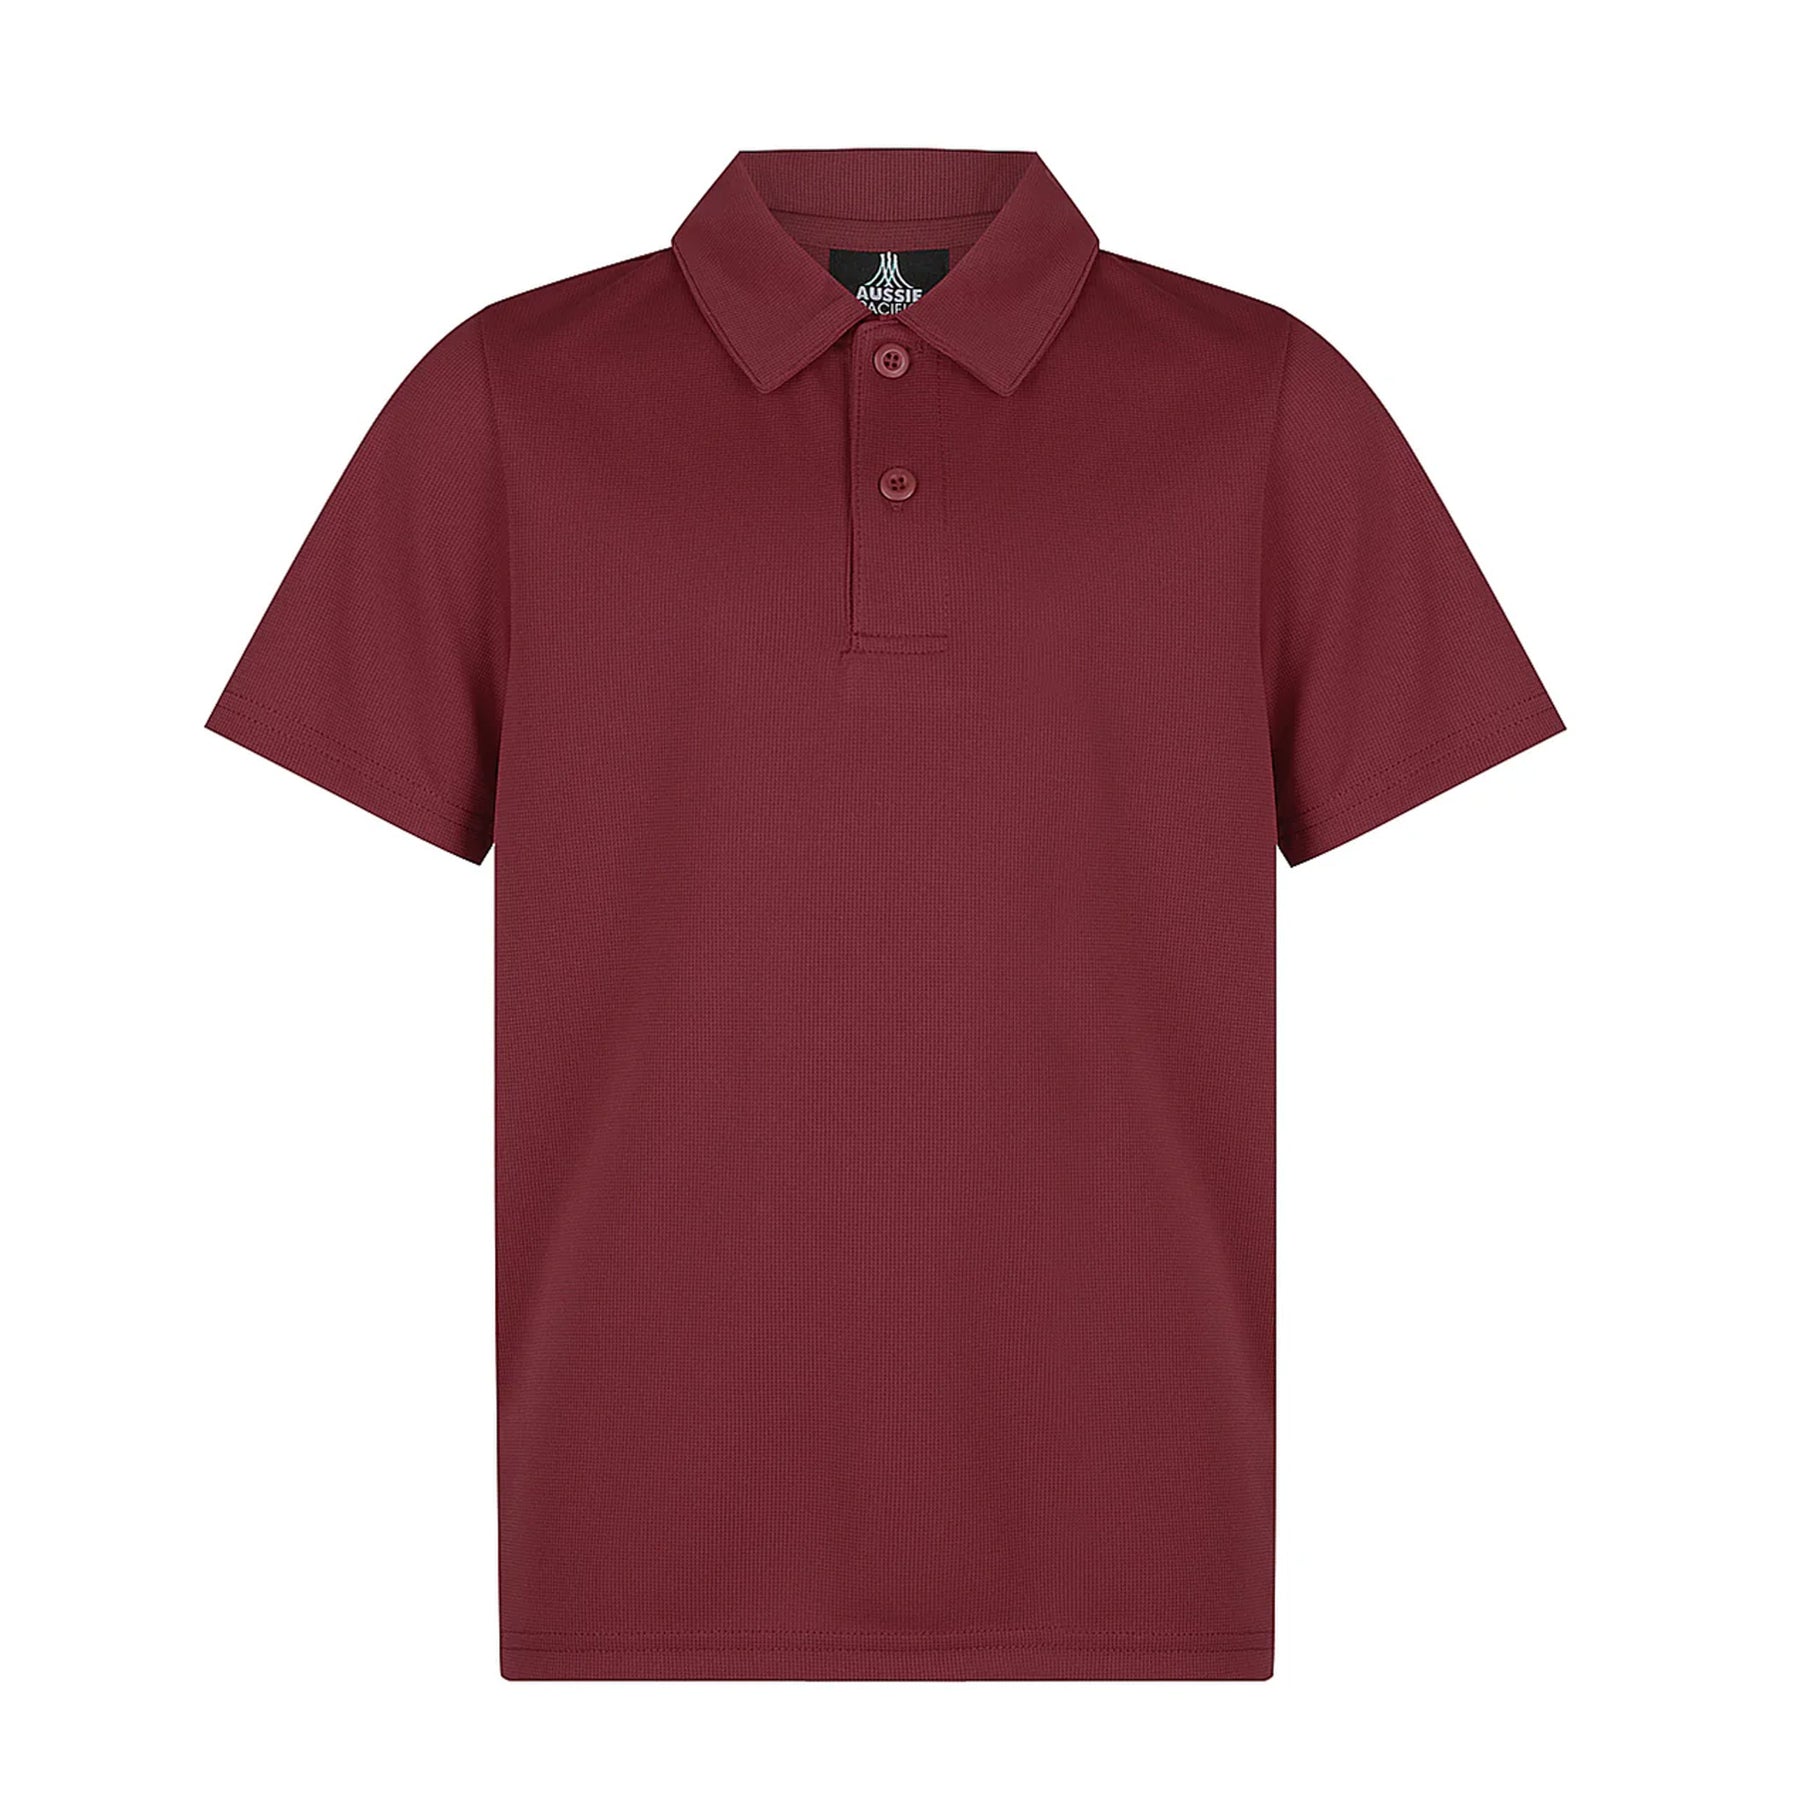 aussie pacific botany kids polos in maroon